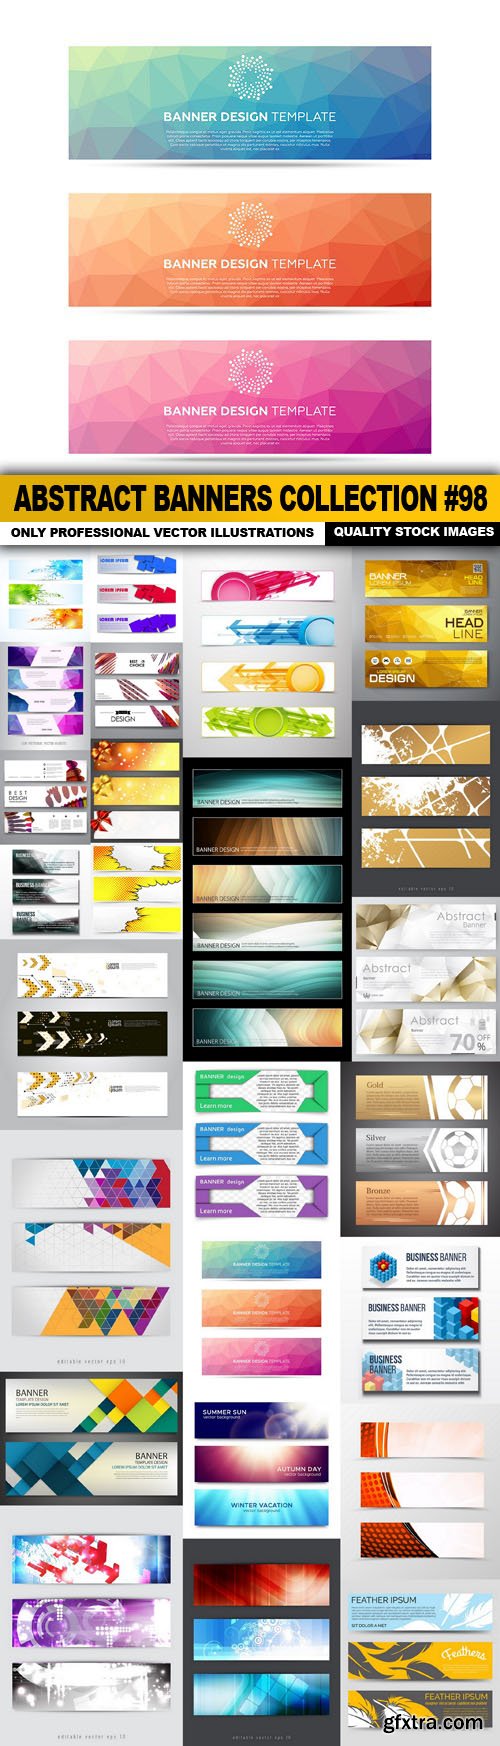 Abstract Banners Collection #98 - 25 Vectors